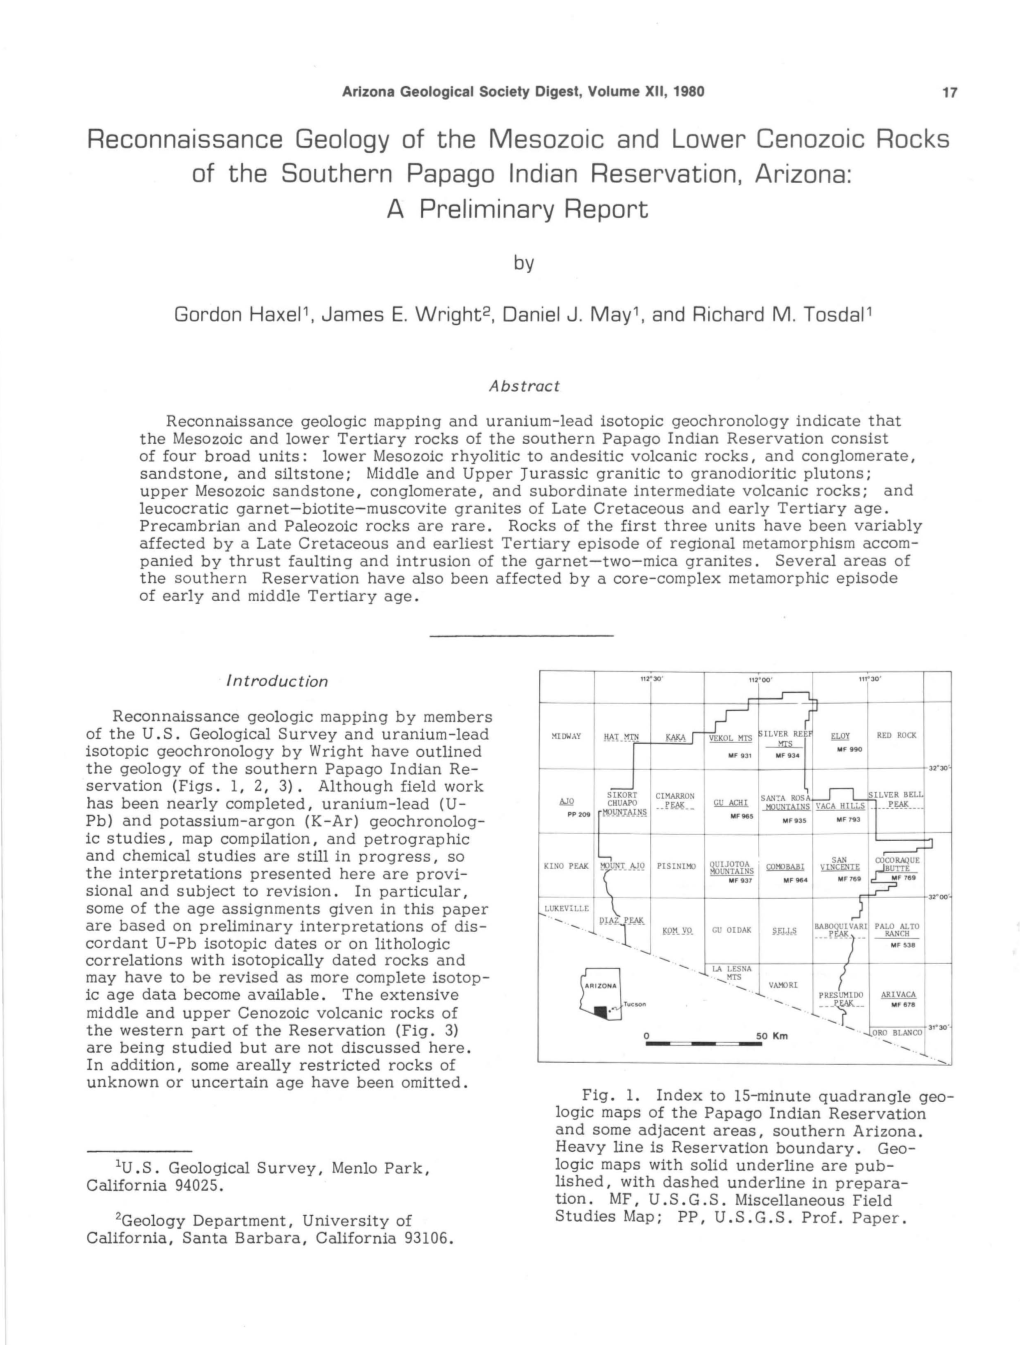 Reconnaissance Geology of the Mesozoic and Lower Cenozoic Rocks of the Southern Papago Indian Reservation, Arizona: a Preliminary Report